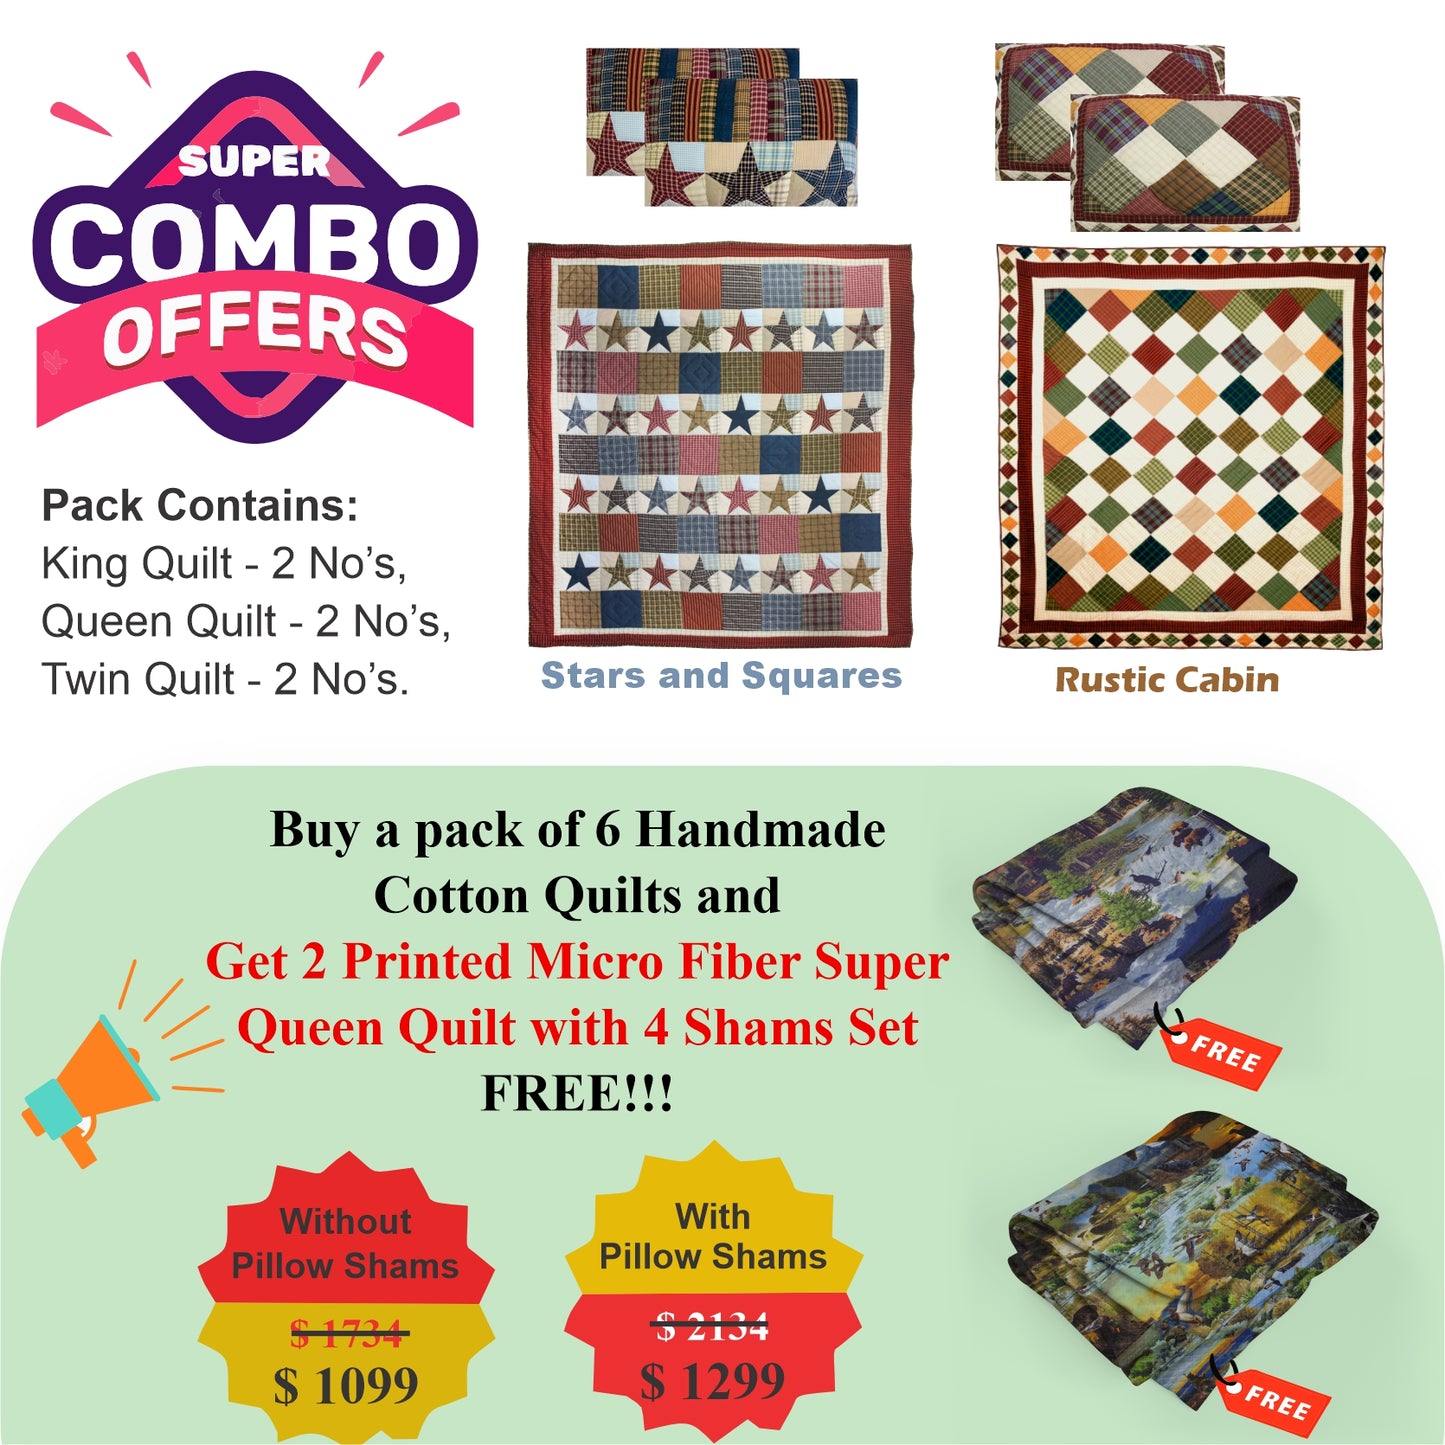 Rustic Cabin /Stars and Squares  - Pack of 6 handmade cotton quilts | Matching Pillow shams | Buy 6 cotton quilts and get 2 Printed Microfiber Super Queen Quilt with 2 Shams